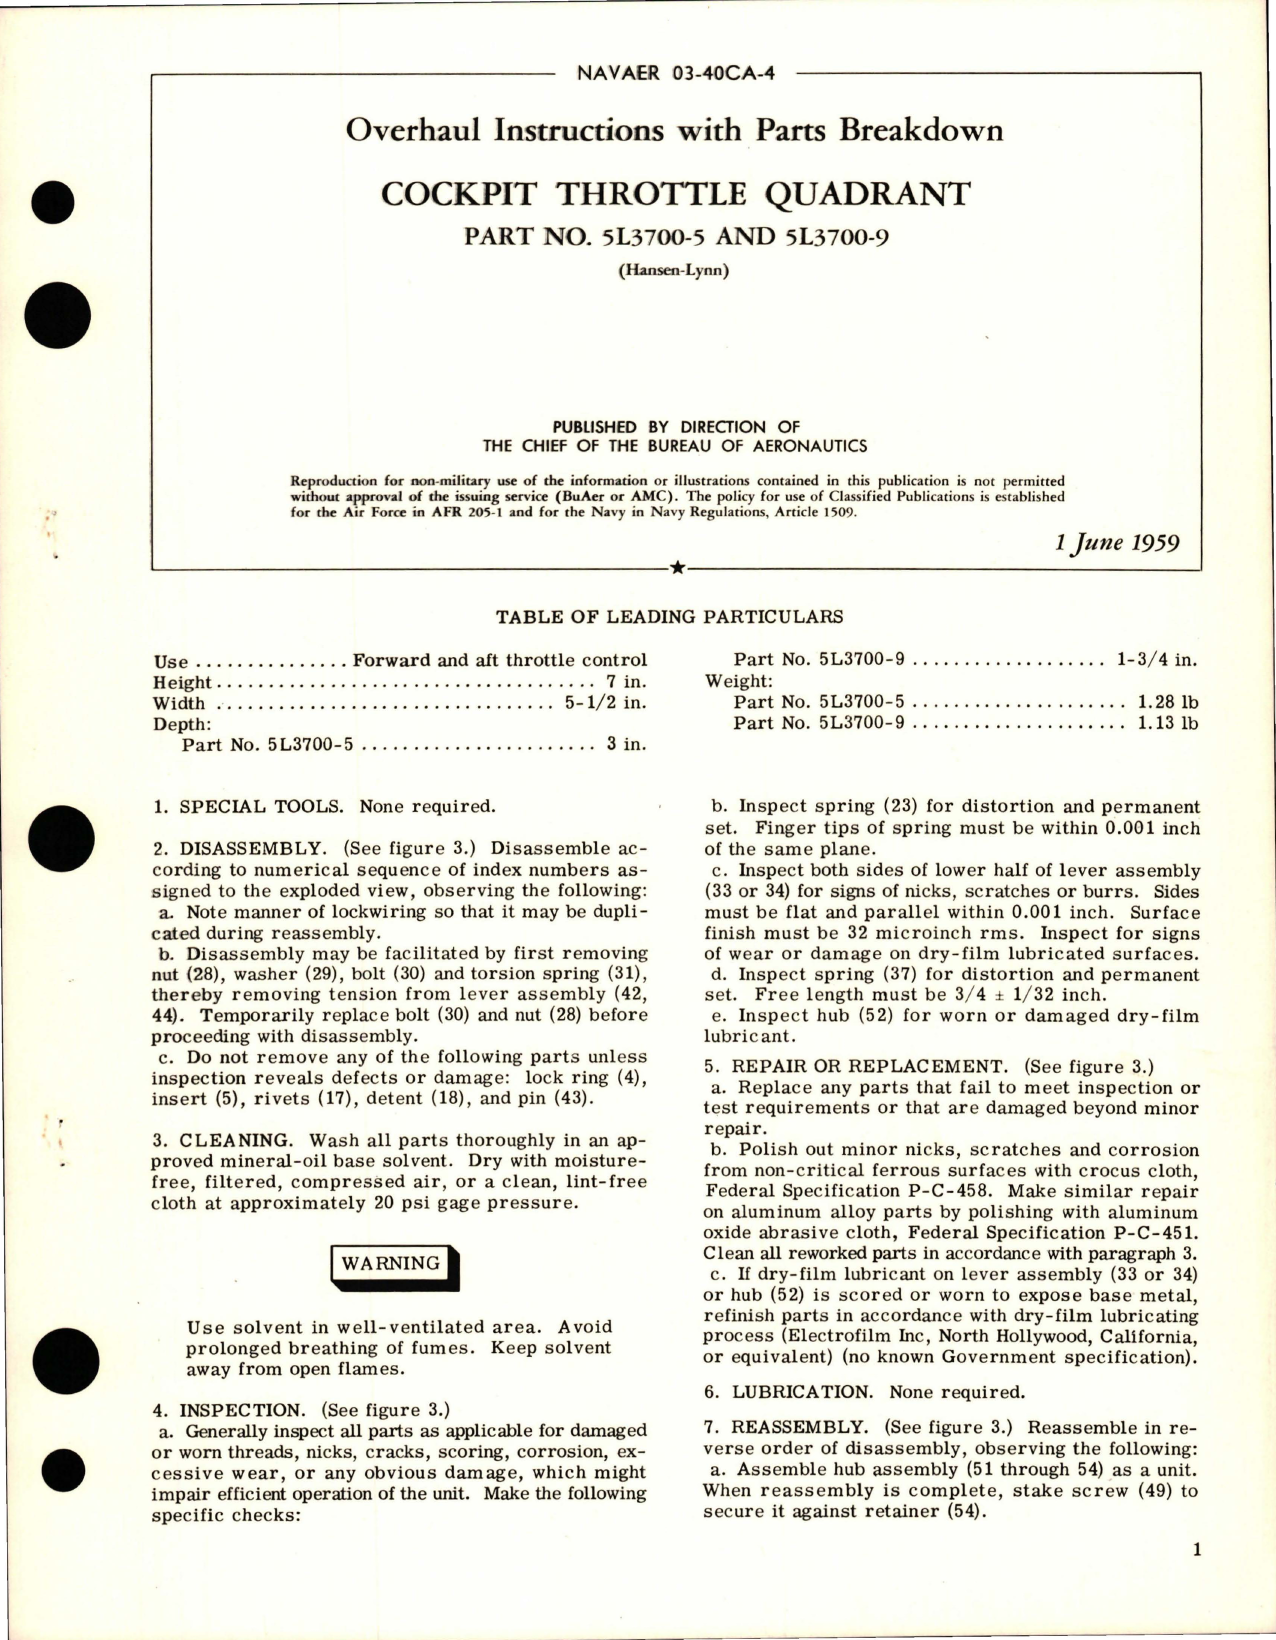 Sample page 1 from AirCorps Library document: Overhaul Instructions with Parts for Cockpit Throttle Quadrant - Parts 5L3700-5 and 5L3700-9